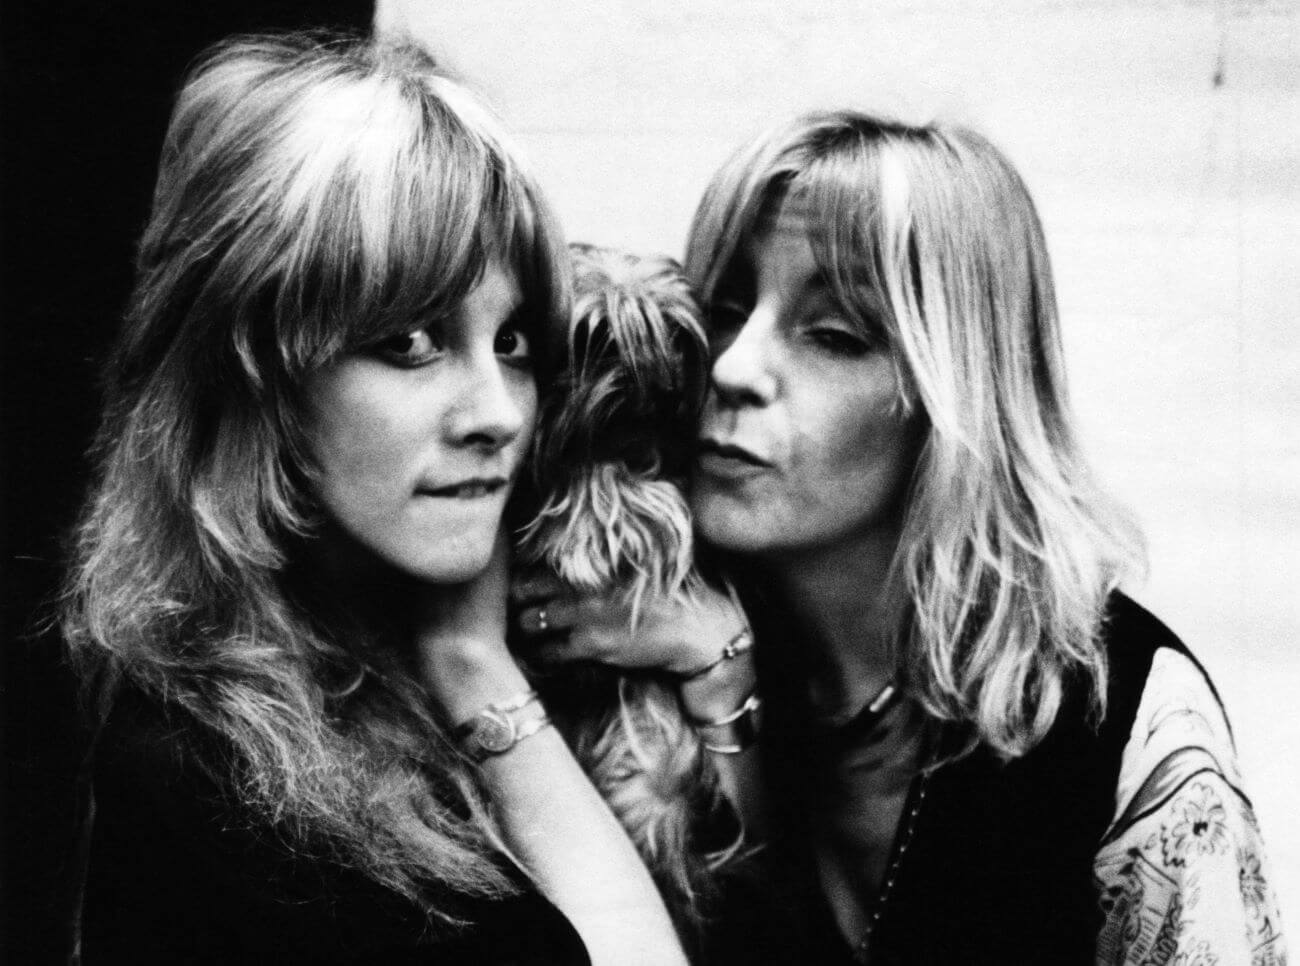 A black and white picture of Stevie Nicks and Christine McVie posing with a dog.